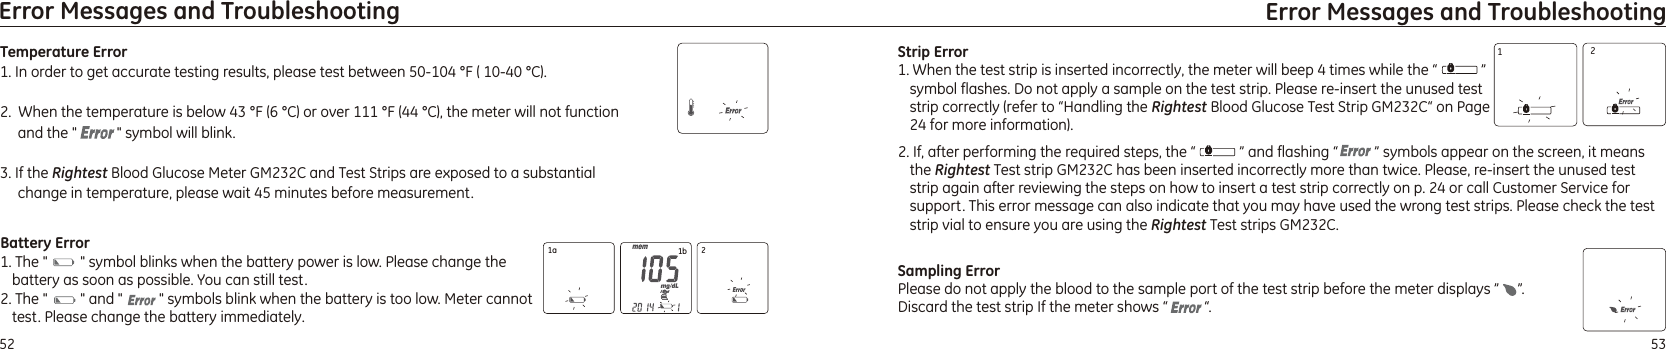 2. If, after performing the required steps, the “            ” and flashing “          ” symbols appear on the screen, it means the Rightest Test strip GM232C has been inserted incorrectly more than twice. Please, re-insert the unused test strip again after reviewing the steps on how to insert a test strip correctly on p. 24 or call Customer Service for support. This error message can also indicate that you may have used the wrong test strips. Please check the test strip vial to ensure you are using the Rightest Test strips GM232C.5352Error Messages and Troubleshooting Error Messages and TroubleshootingTemperature Error1. In order to get accurate testing results, please test between 50-104 °F ( 10-40 °C).    2.  When the temperature is below 43 °F (6 °C) or over 111 °F (44 °C), the meter will not function and the &quot;           &quot; symbol will blink.3. If the Rightest Blood Glucose Meter  and Test Strips are exposed to a substantial change in temperature, please wait 45 minutes before measurement.GM232C Battery Error1. The &quot;         &quot; symbol blinks when the battery power is low. Please change the battery as soon as possible. You can still test.and &quot;            symbols blink when the battery is too low. Meter cannot test. Please change the battery immediately.2. The &quot;         &quot;  &quot;Strip Error1. When the test strip is inserted incorrectly, the meter will beep 4 times while the “            ” symbol flashes. Do not apply a sample on the test strip. Please re-insert the unused test strip correctly (refer to “Handling the Rightest Blood Glucose Test Strip  “ on Page 24 for more information).GM232C1a 1b 212Sampling ErrorPlease do not apply the blood to the sample port of the test strip before the meter displays ”     ”. Discard the test strip If the meter shows “          “.